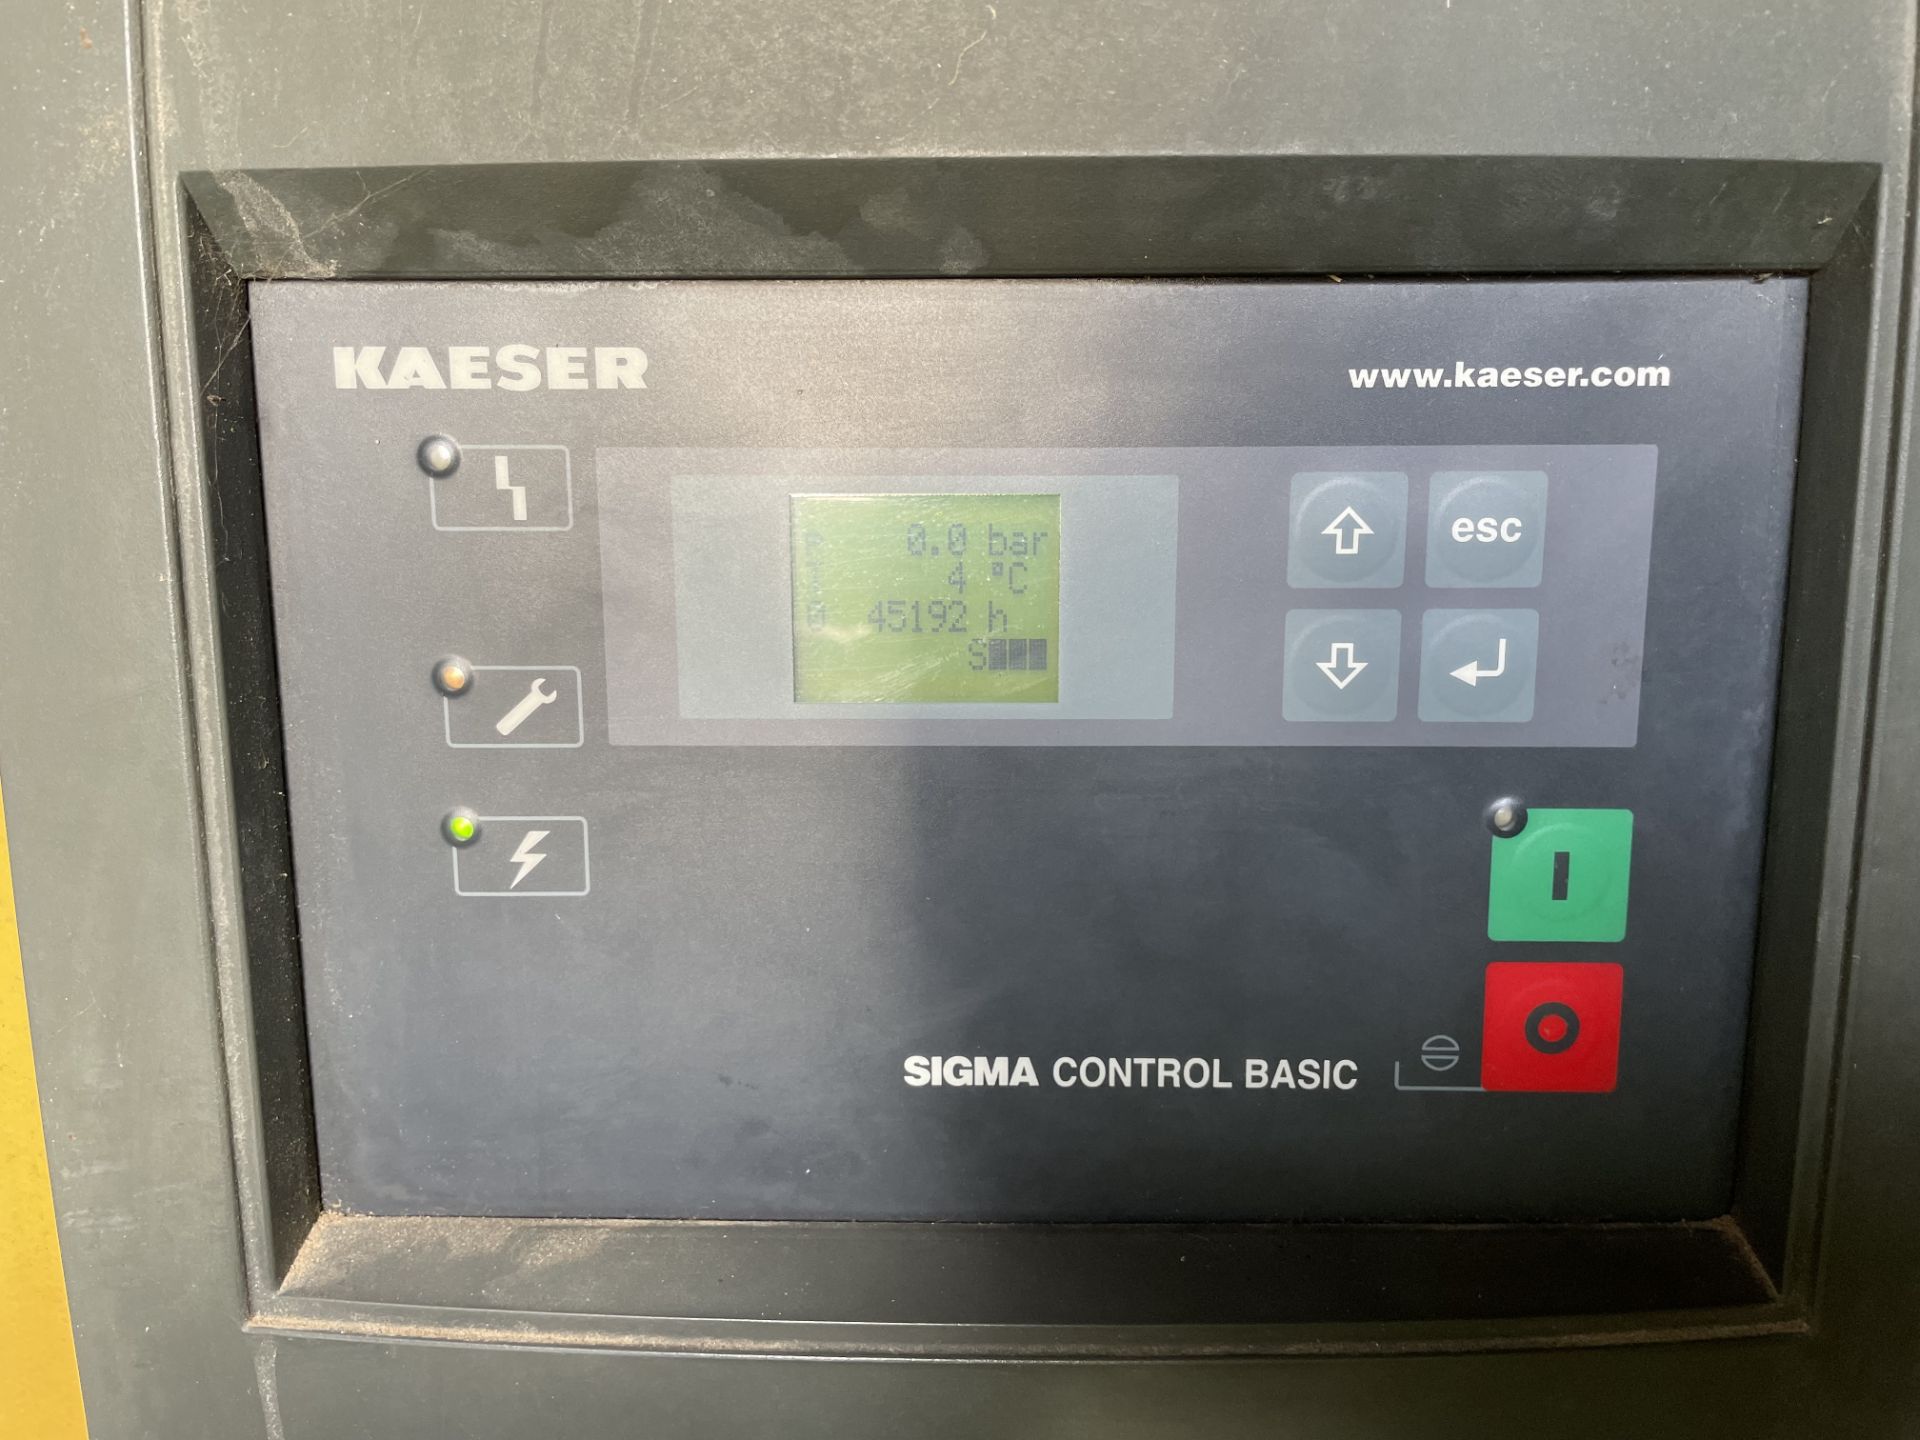 Kaeser Sigma SM 12 HPC Variable Speed Rotary Screw Air Compressor S/No. 4170, Run Hours: 45,192 - Image 7 of 7